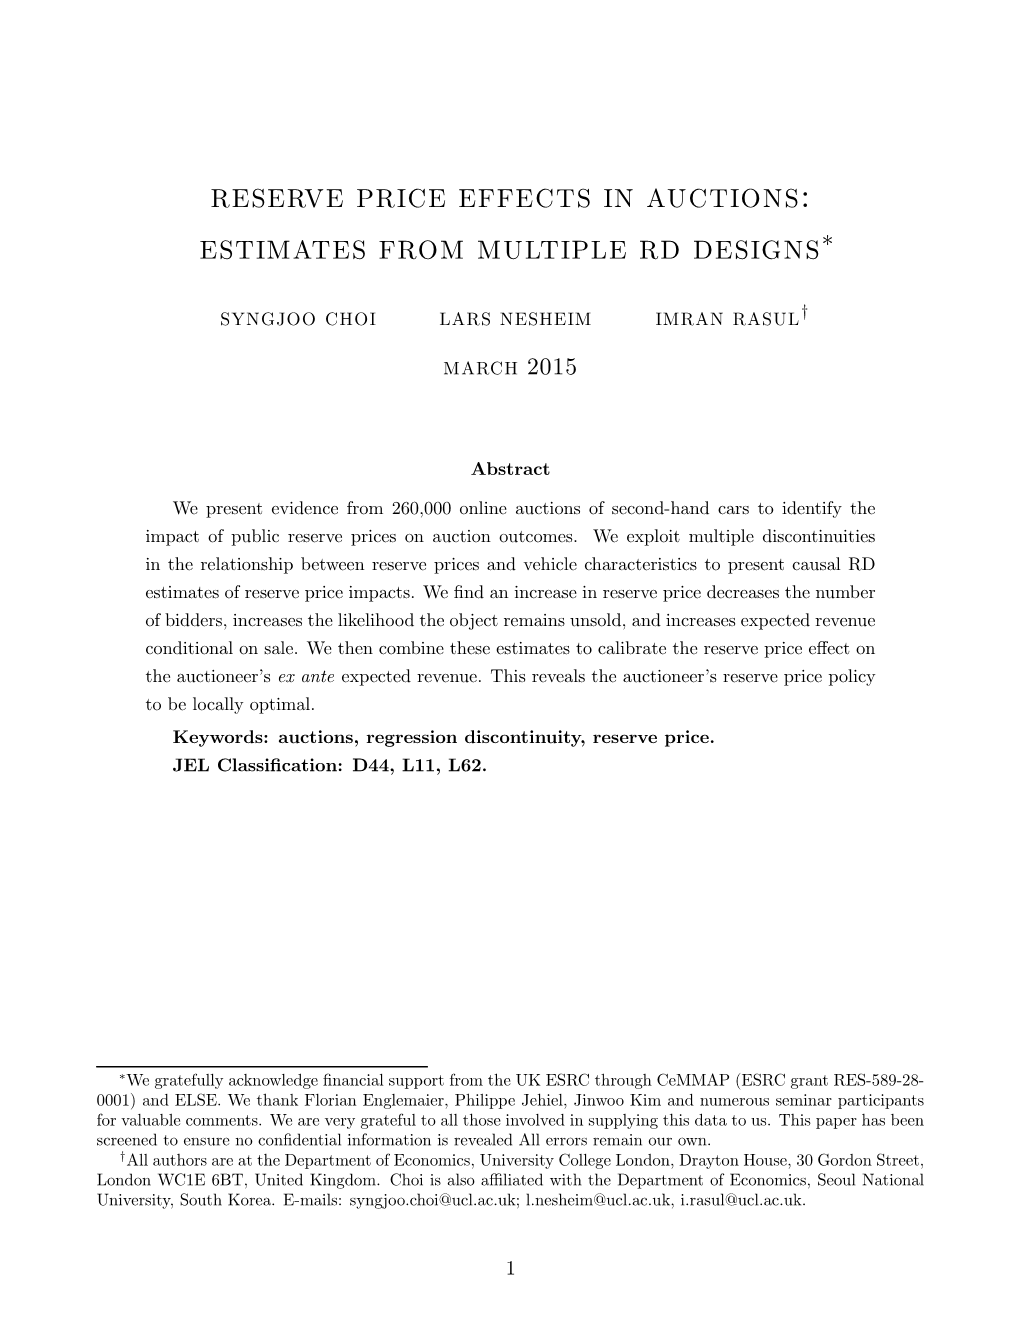 Reserve Price Effects in Auctions: Estimates from Multiple Rd